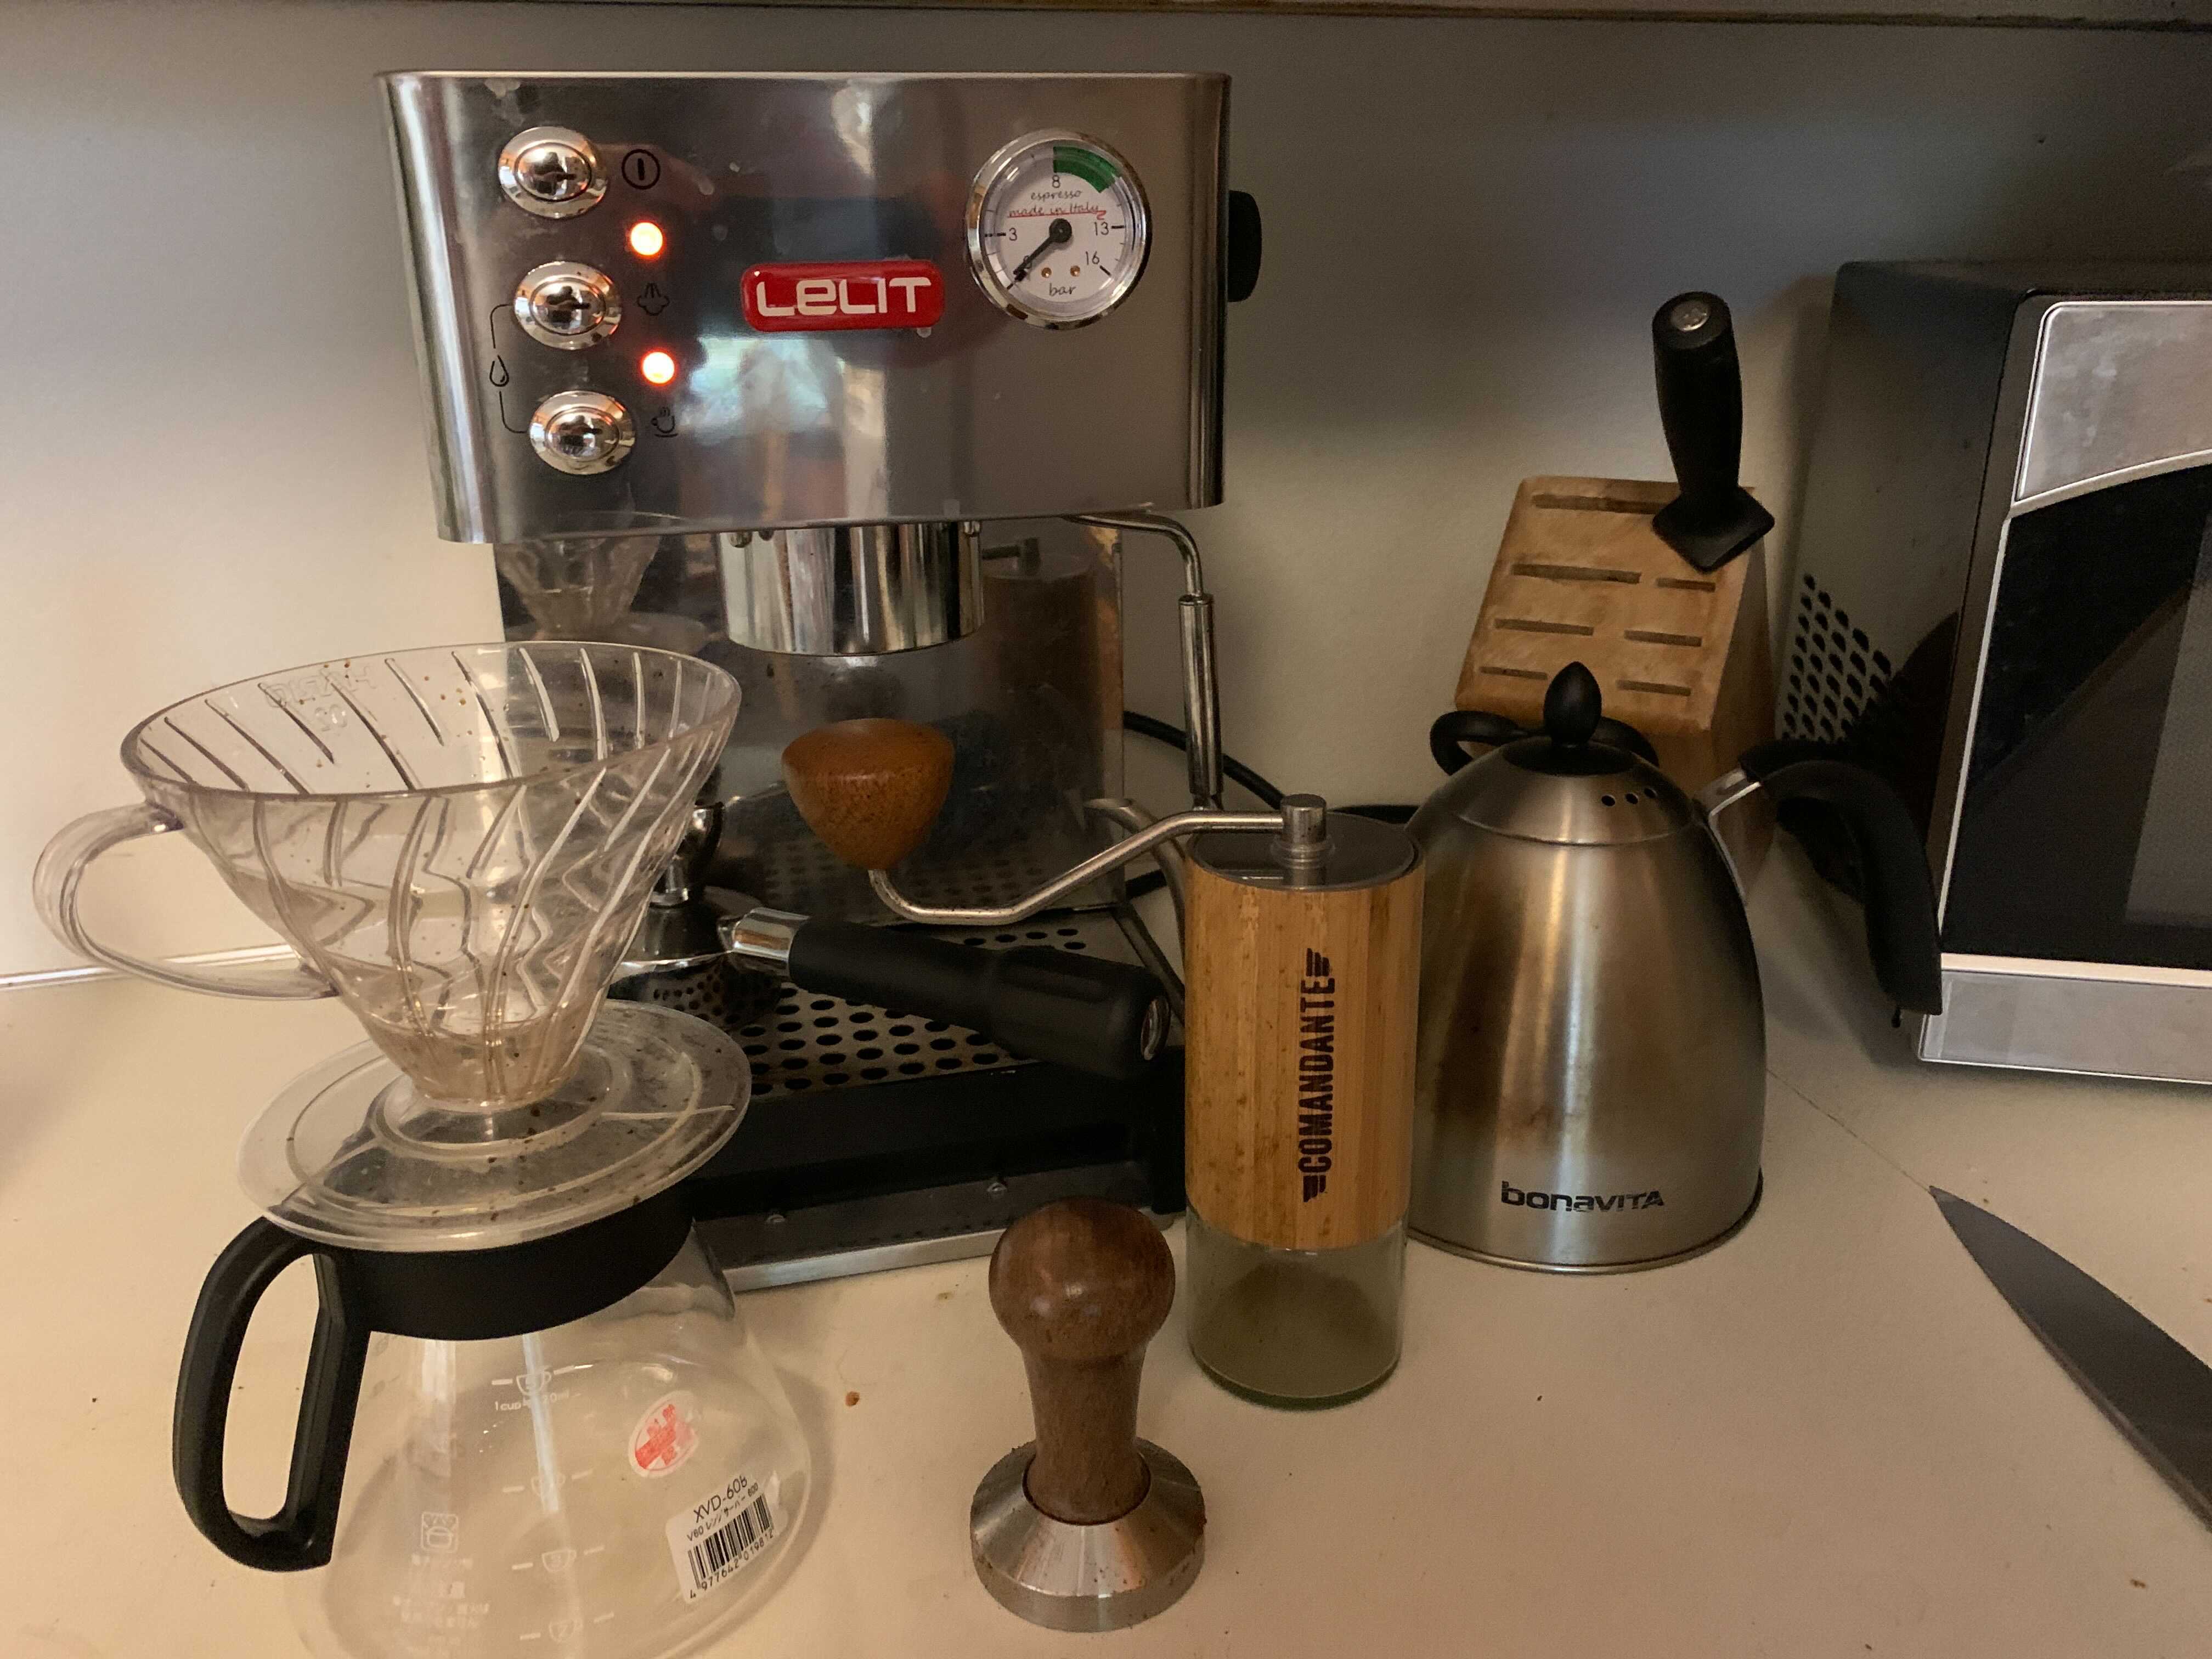 Coffee machine and supplies, Picture source: Trey Bianchini